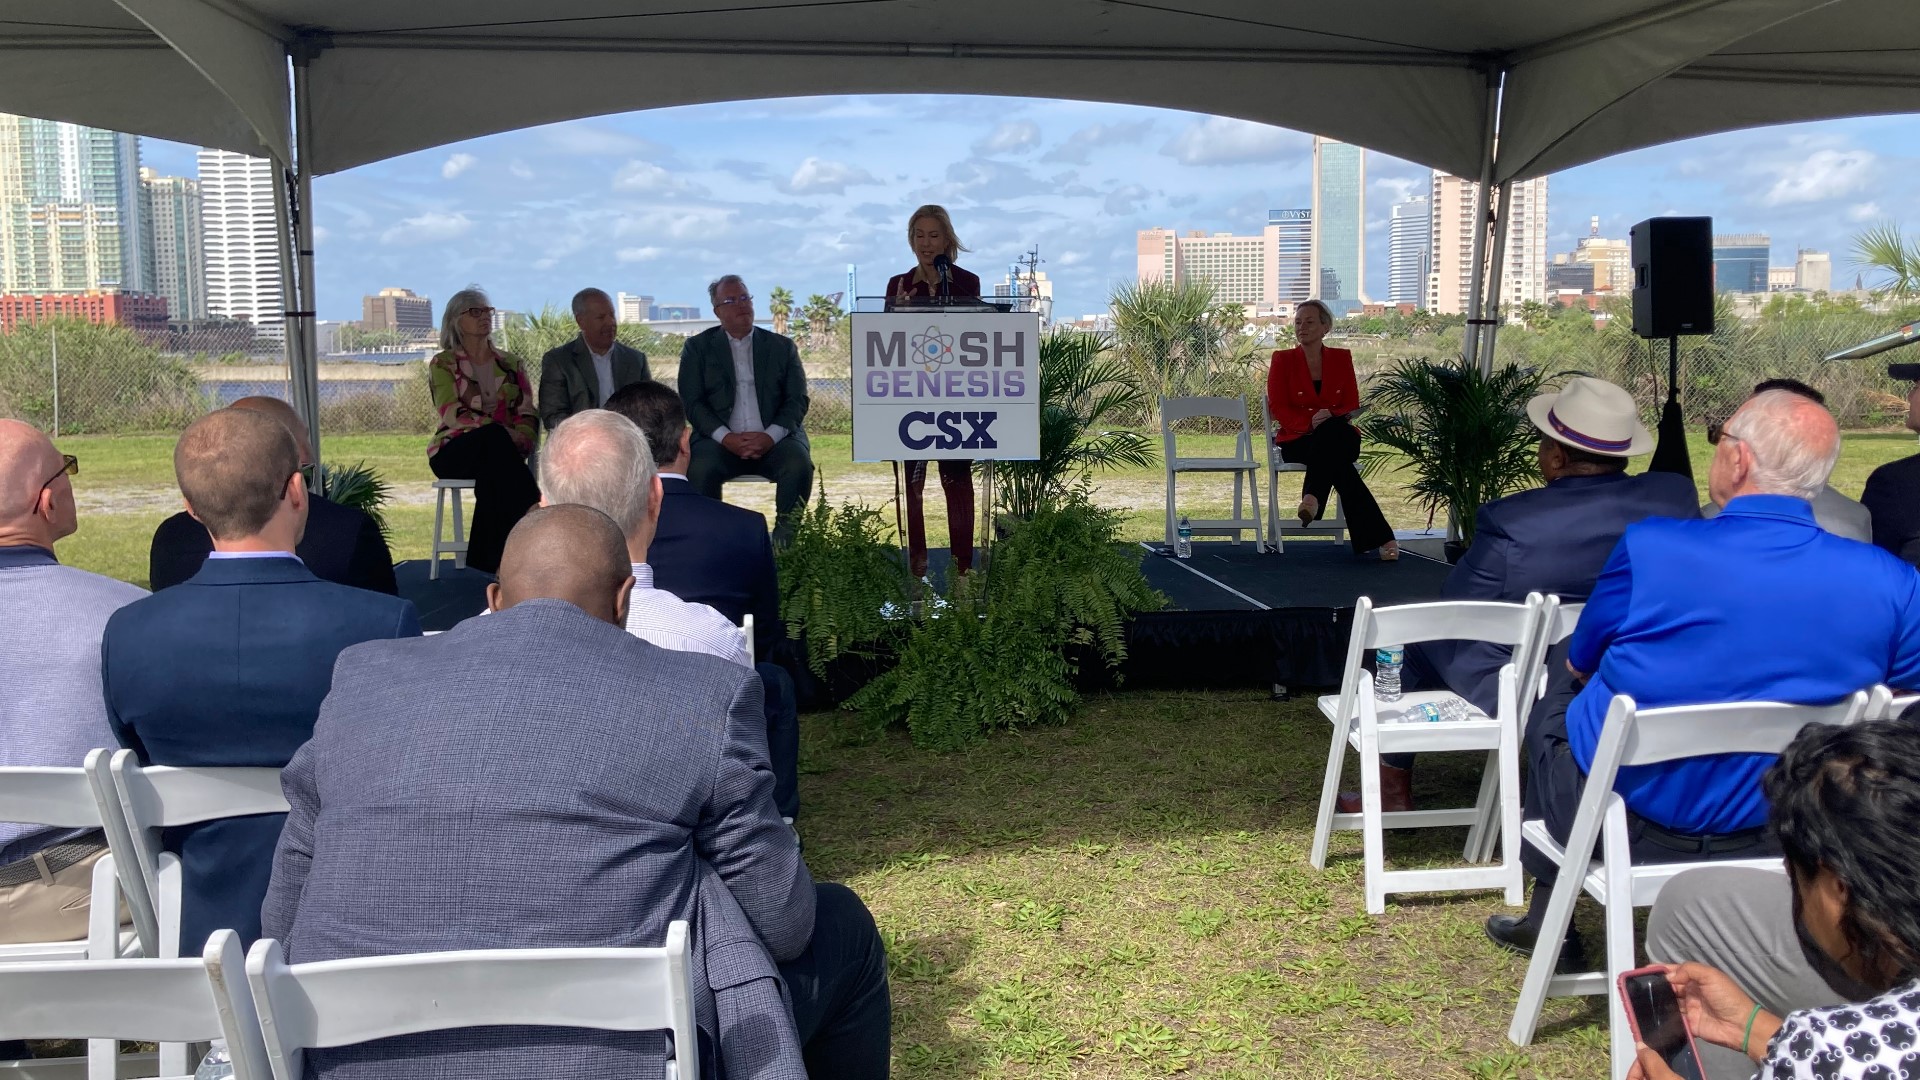 The MOSH had to raise $40 million as part of an agreement with the City of Jacksonville. Leaders expect to reach that goal by June.